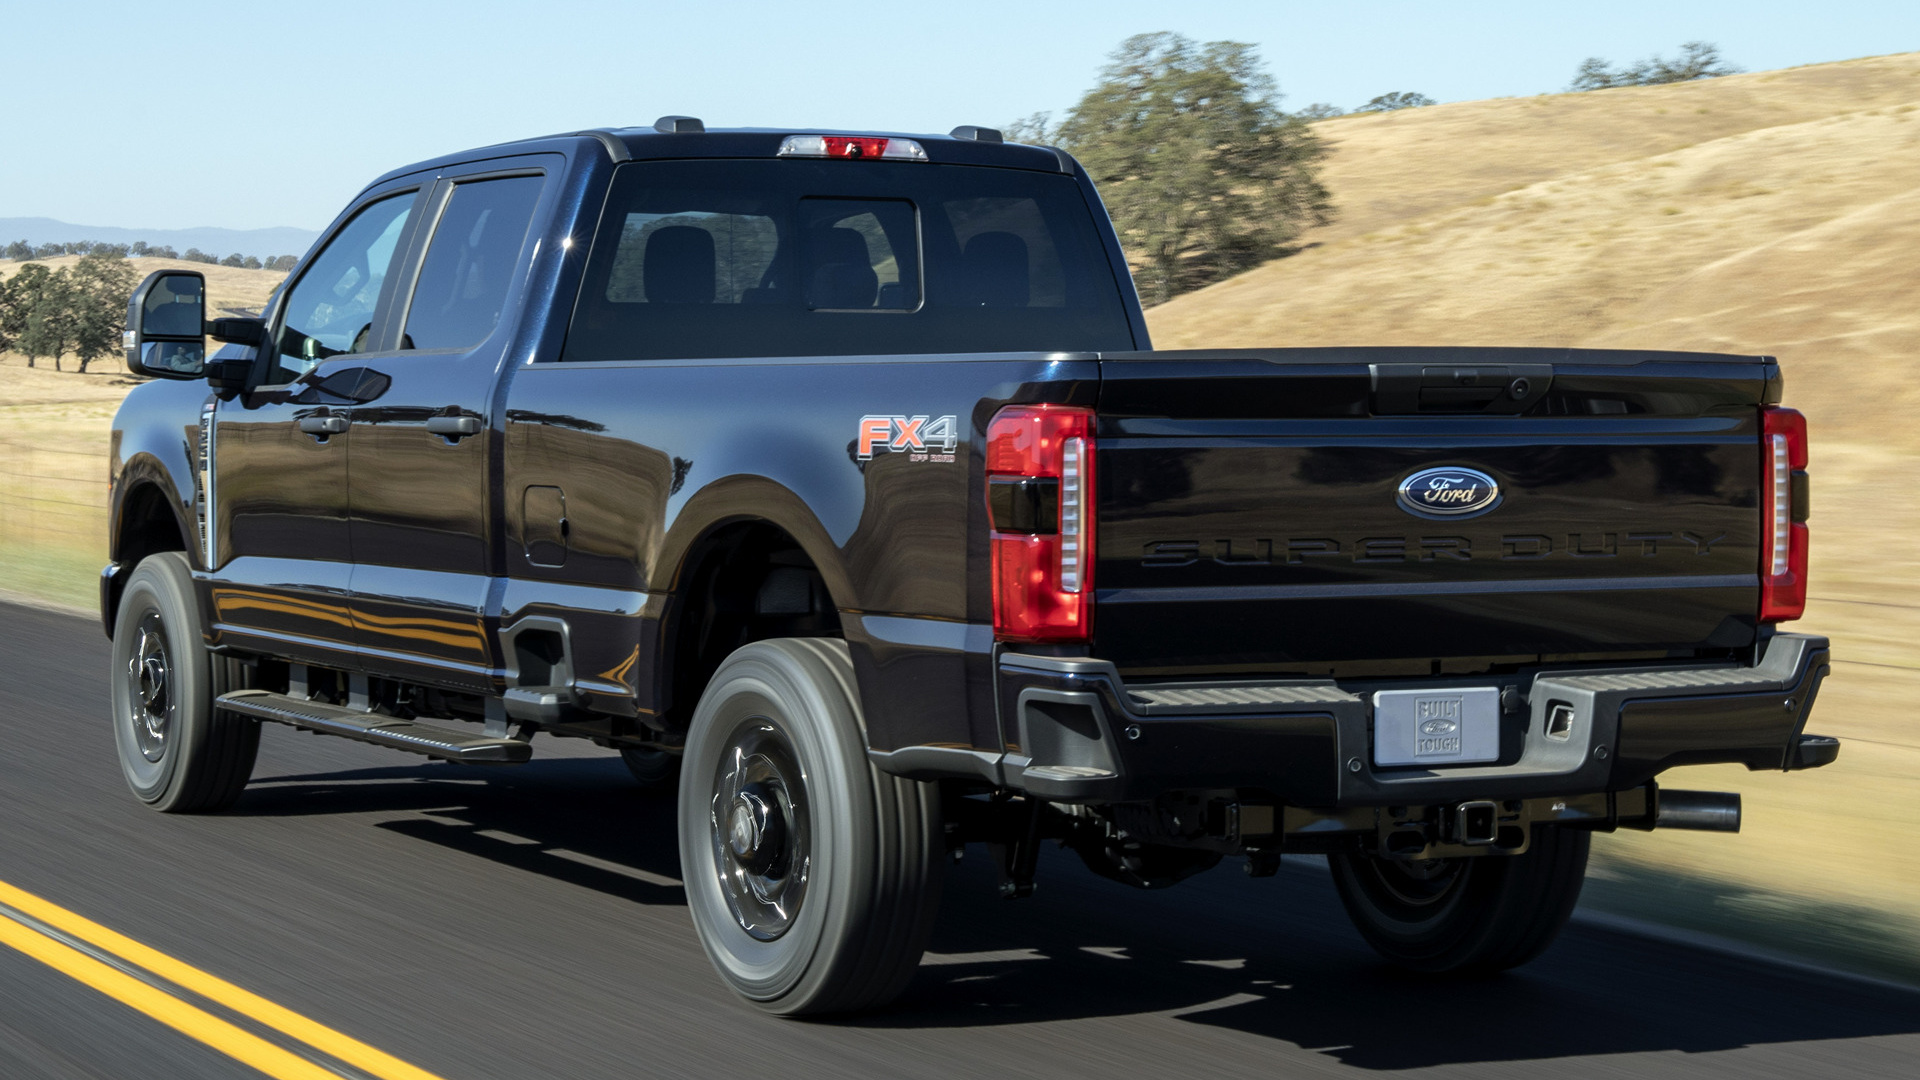 2023 Ford F250 Crew Cab STX Appearance Package Wallpapers and HD